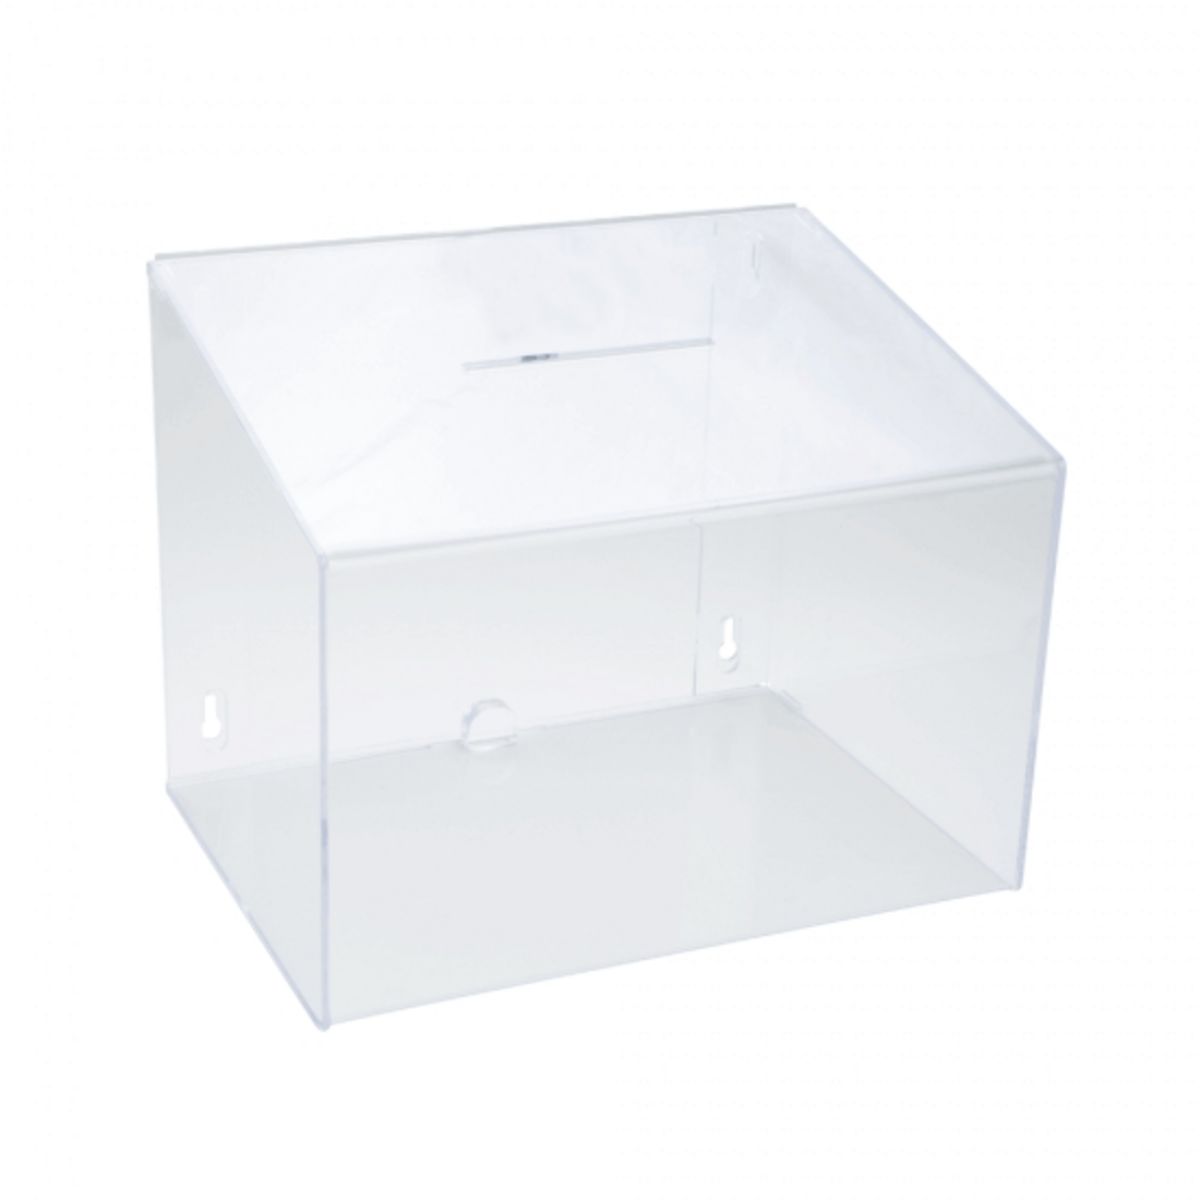 Large acrylic suggestion box with no lock or header.png